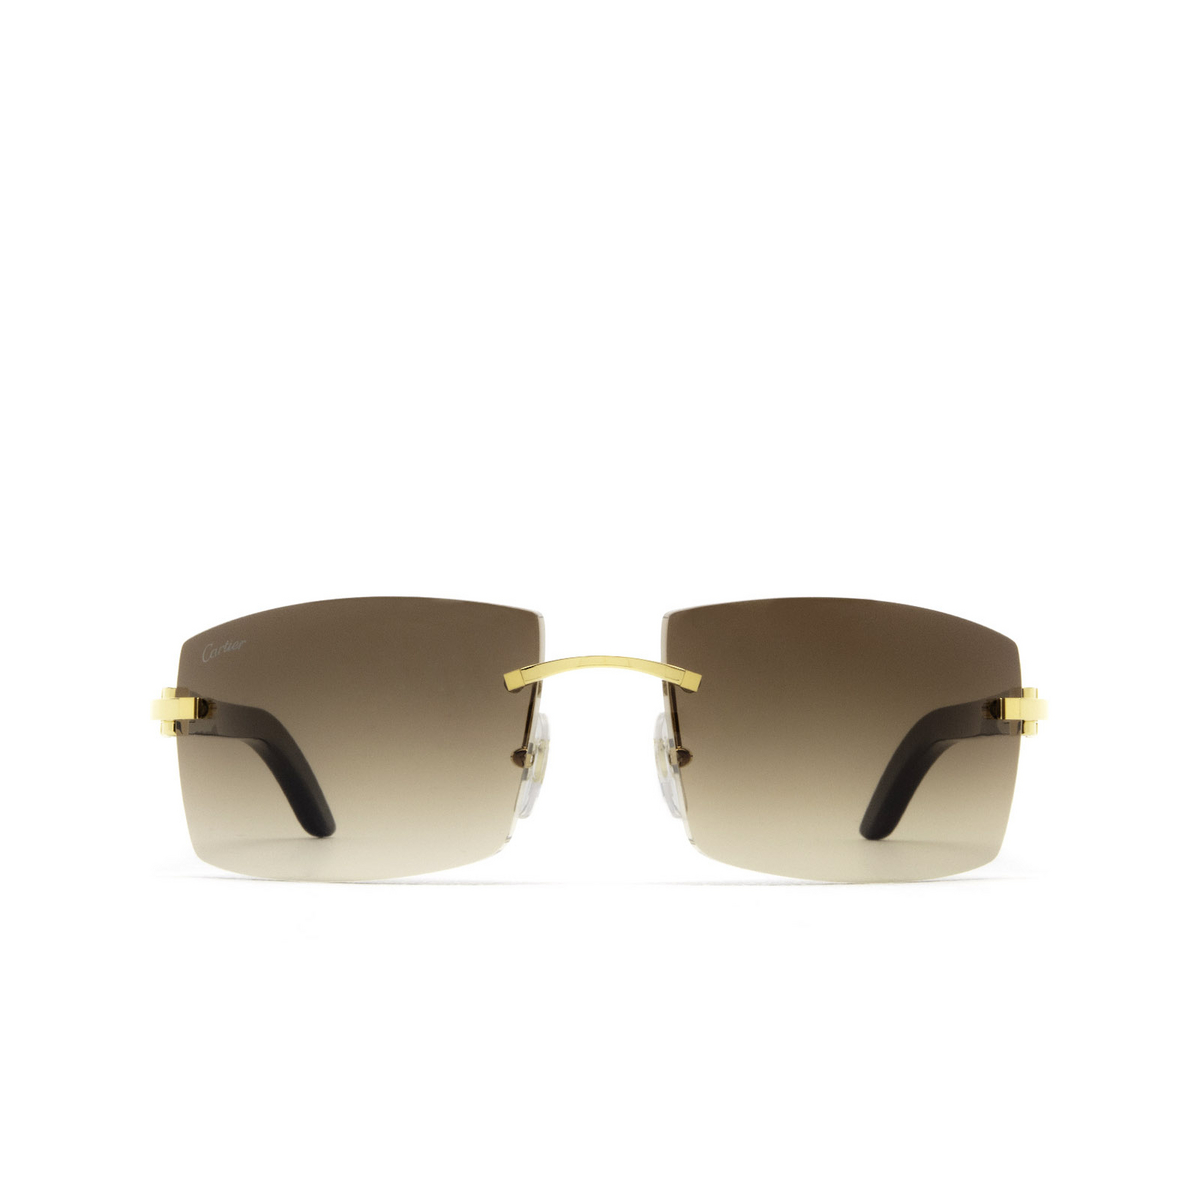 Cartier® Rectangle Sunglasses: CT0021RS color Gold 001 - front view.